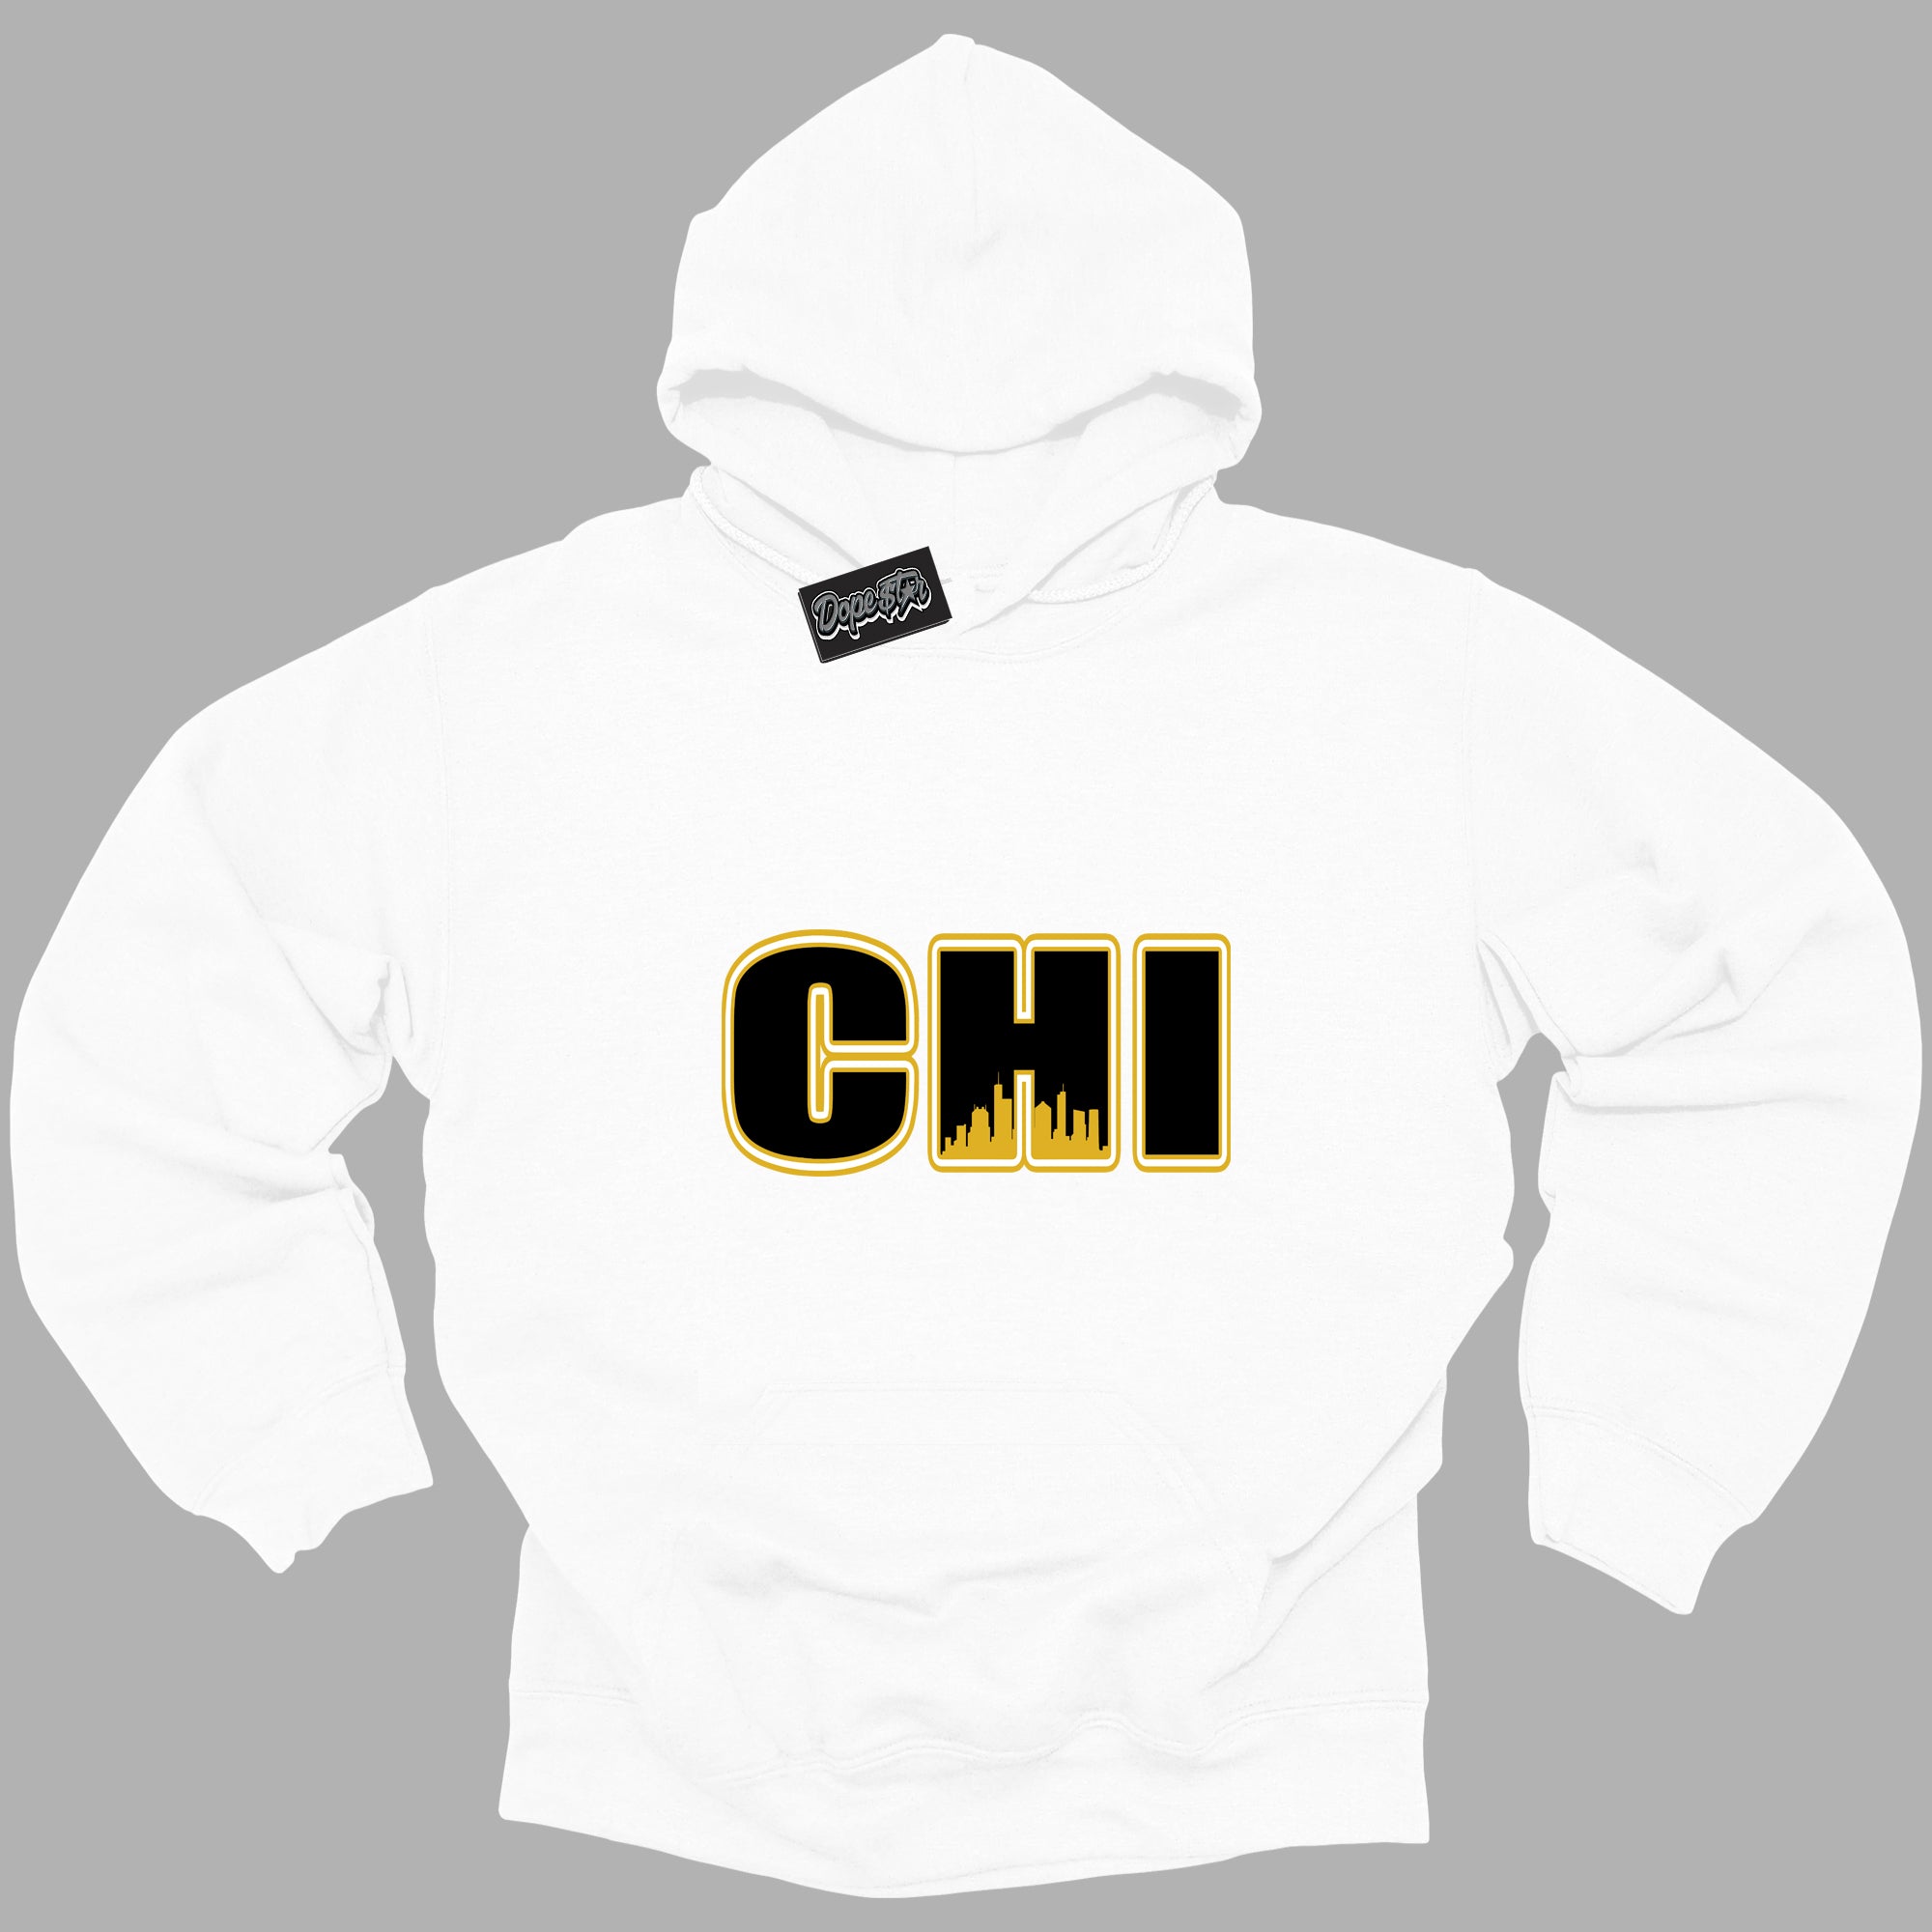 Cool White Hoodie with “ Chicago ”  design that Perfectly Matches Yellow Ochre 6s Sneakers.